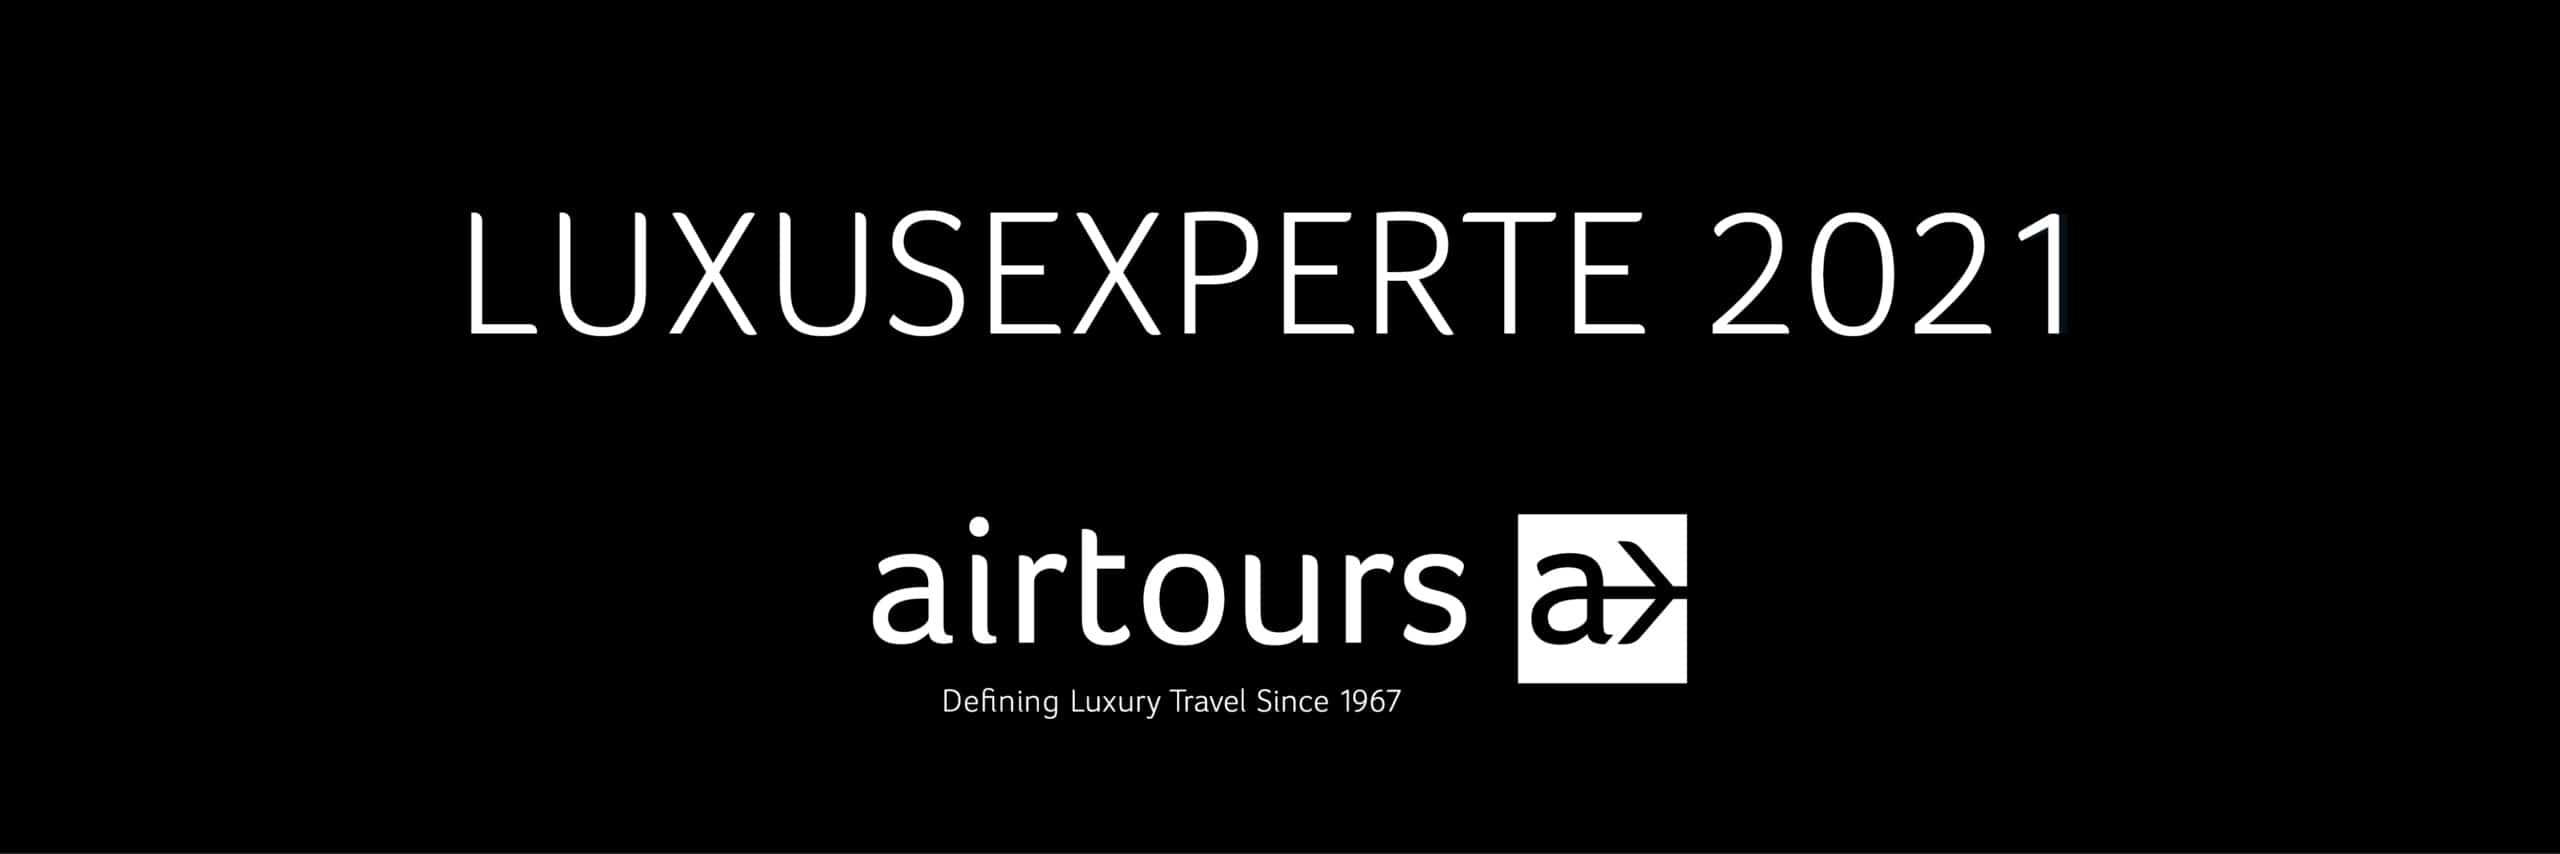 Airtours Business Club Luxusexperte 2021 Webbanner scaled